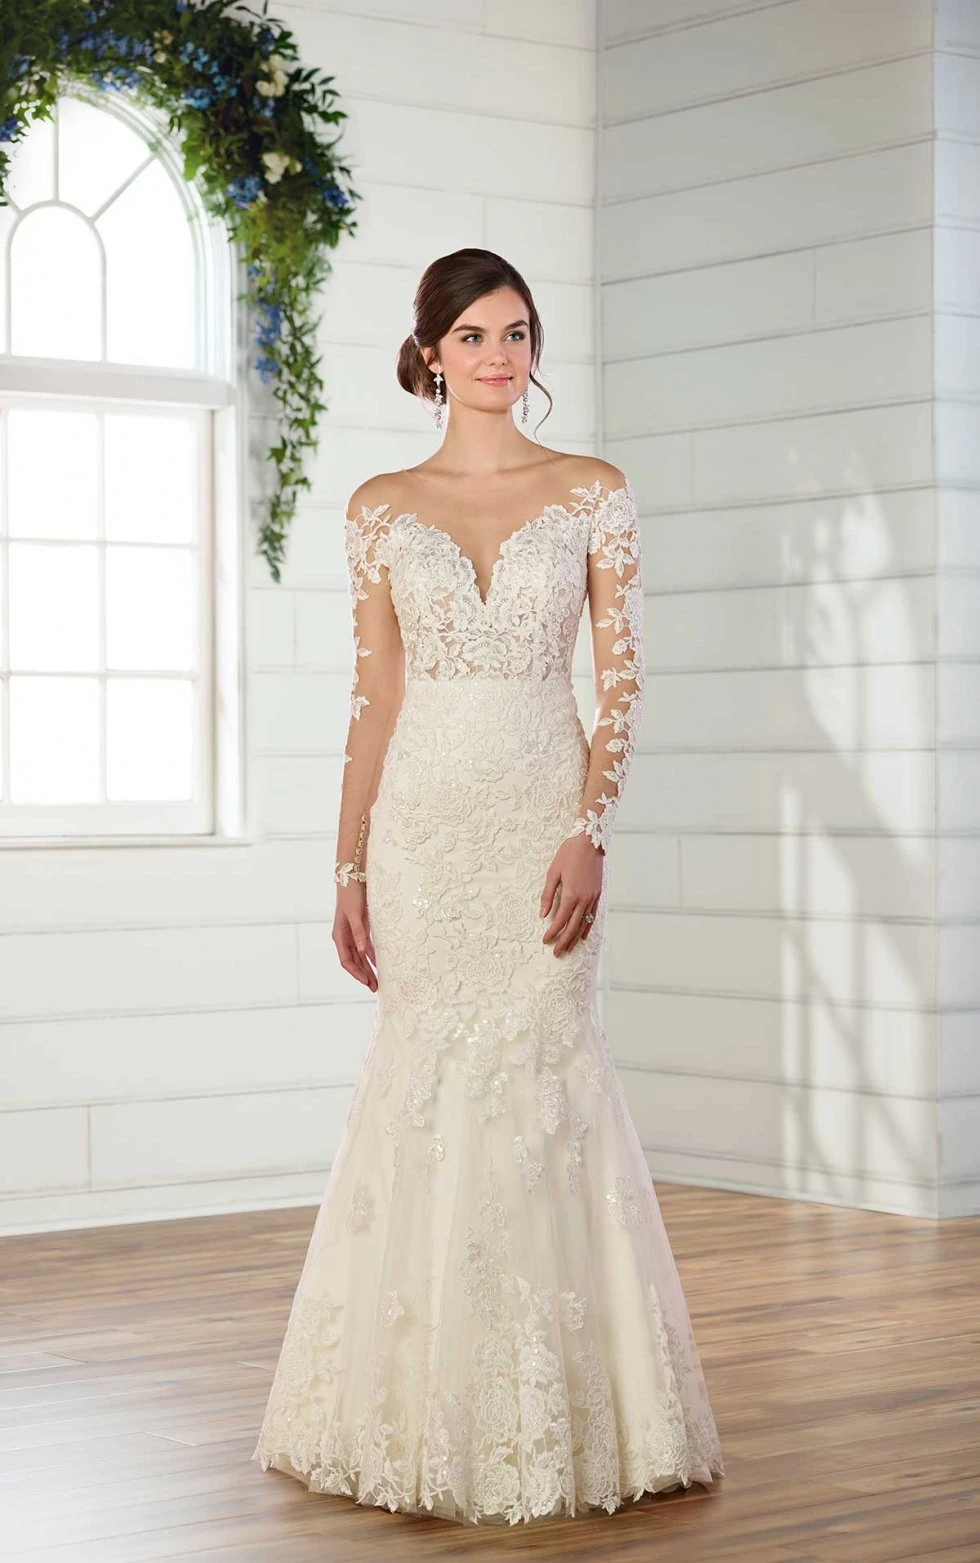 Wedding Dress with Lace Sleeves and VNeck Essense of